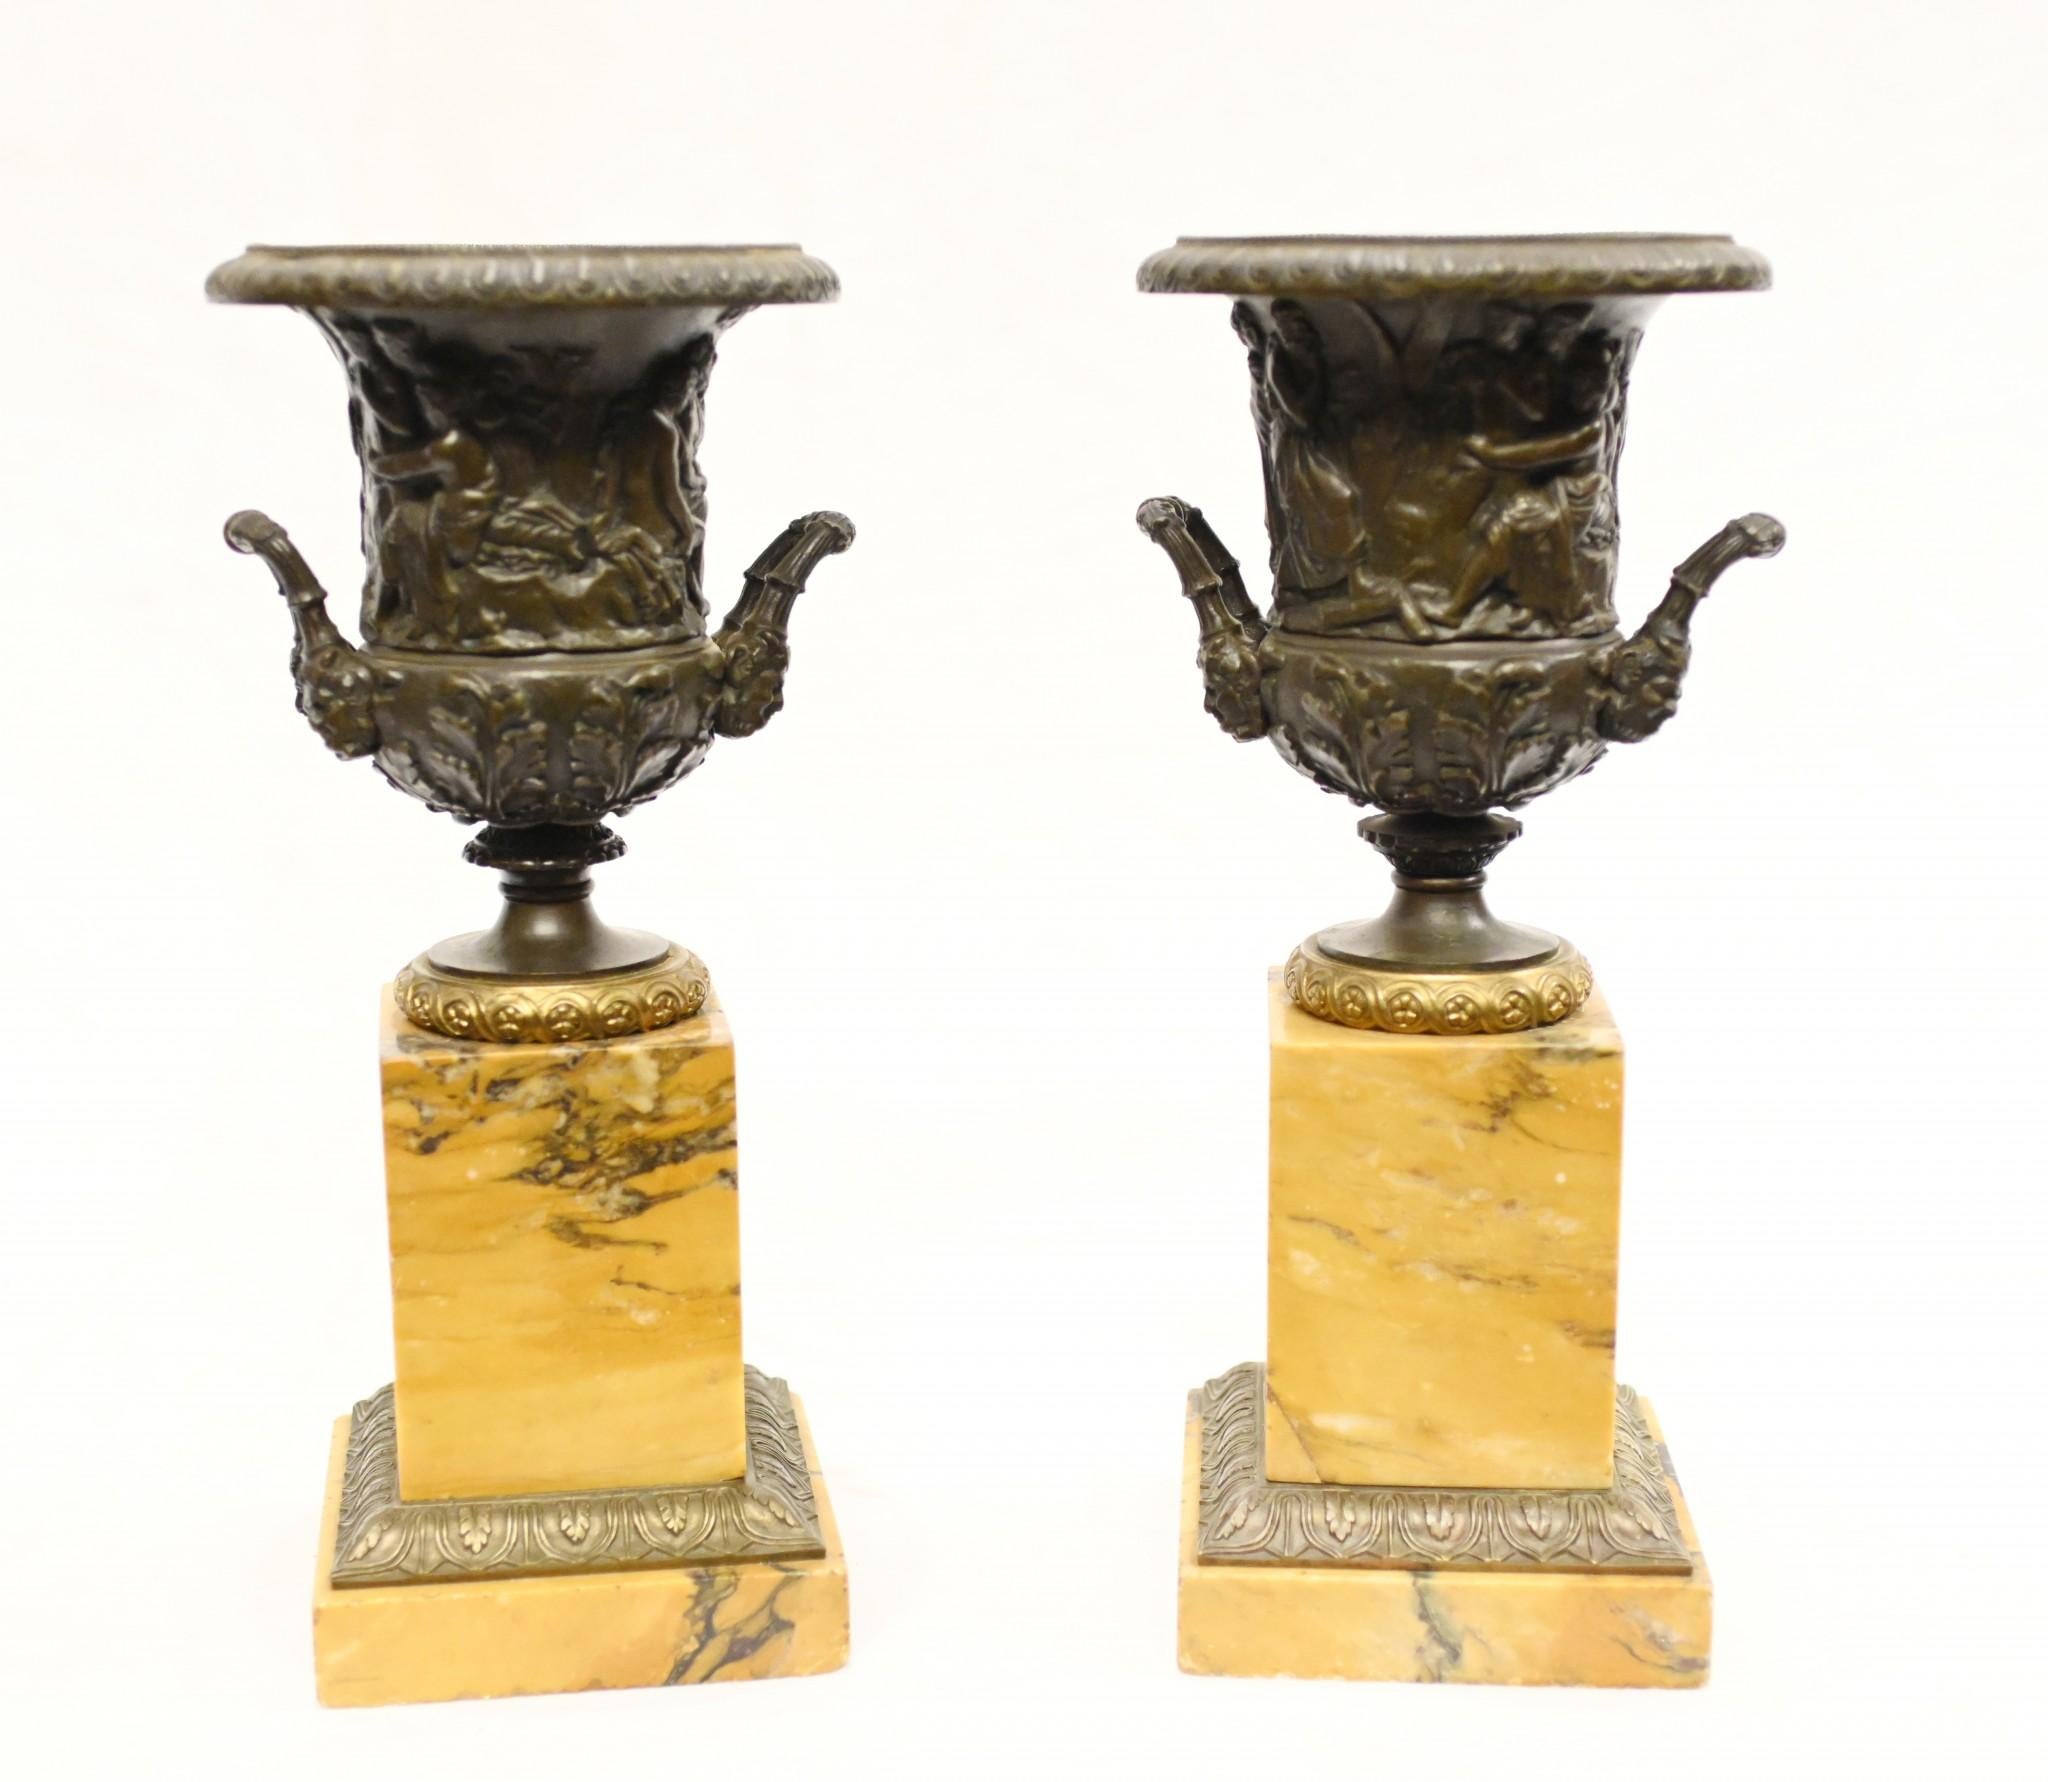 Glorious pair of Grand Tour gilt and bronze urns on marble pedestal stands
Circa 1820 on these Italian antiques
The urns - of campana form - stand on the Sienna marble pedestal bases inset with gilt
Love the salmon pink colour to the marble
The urns